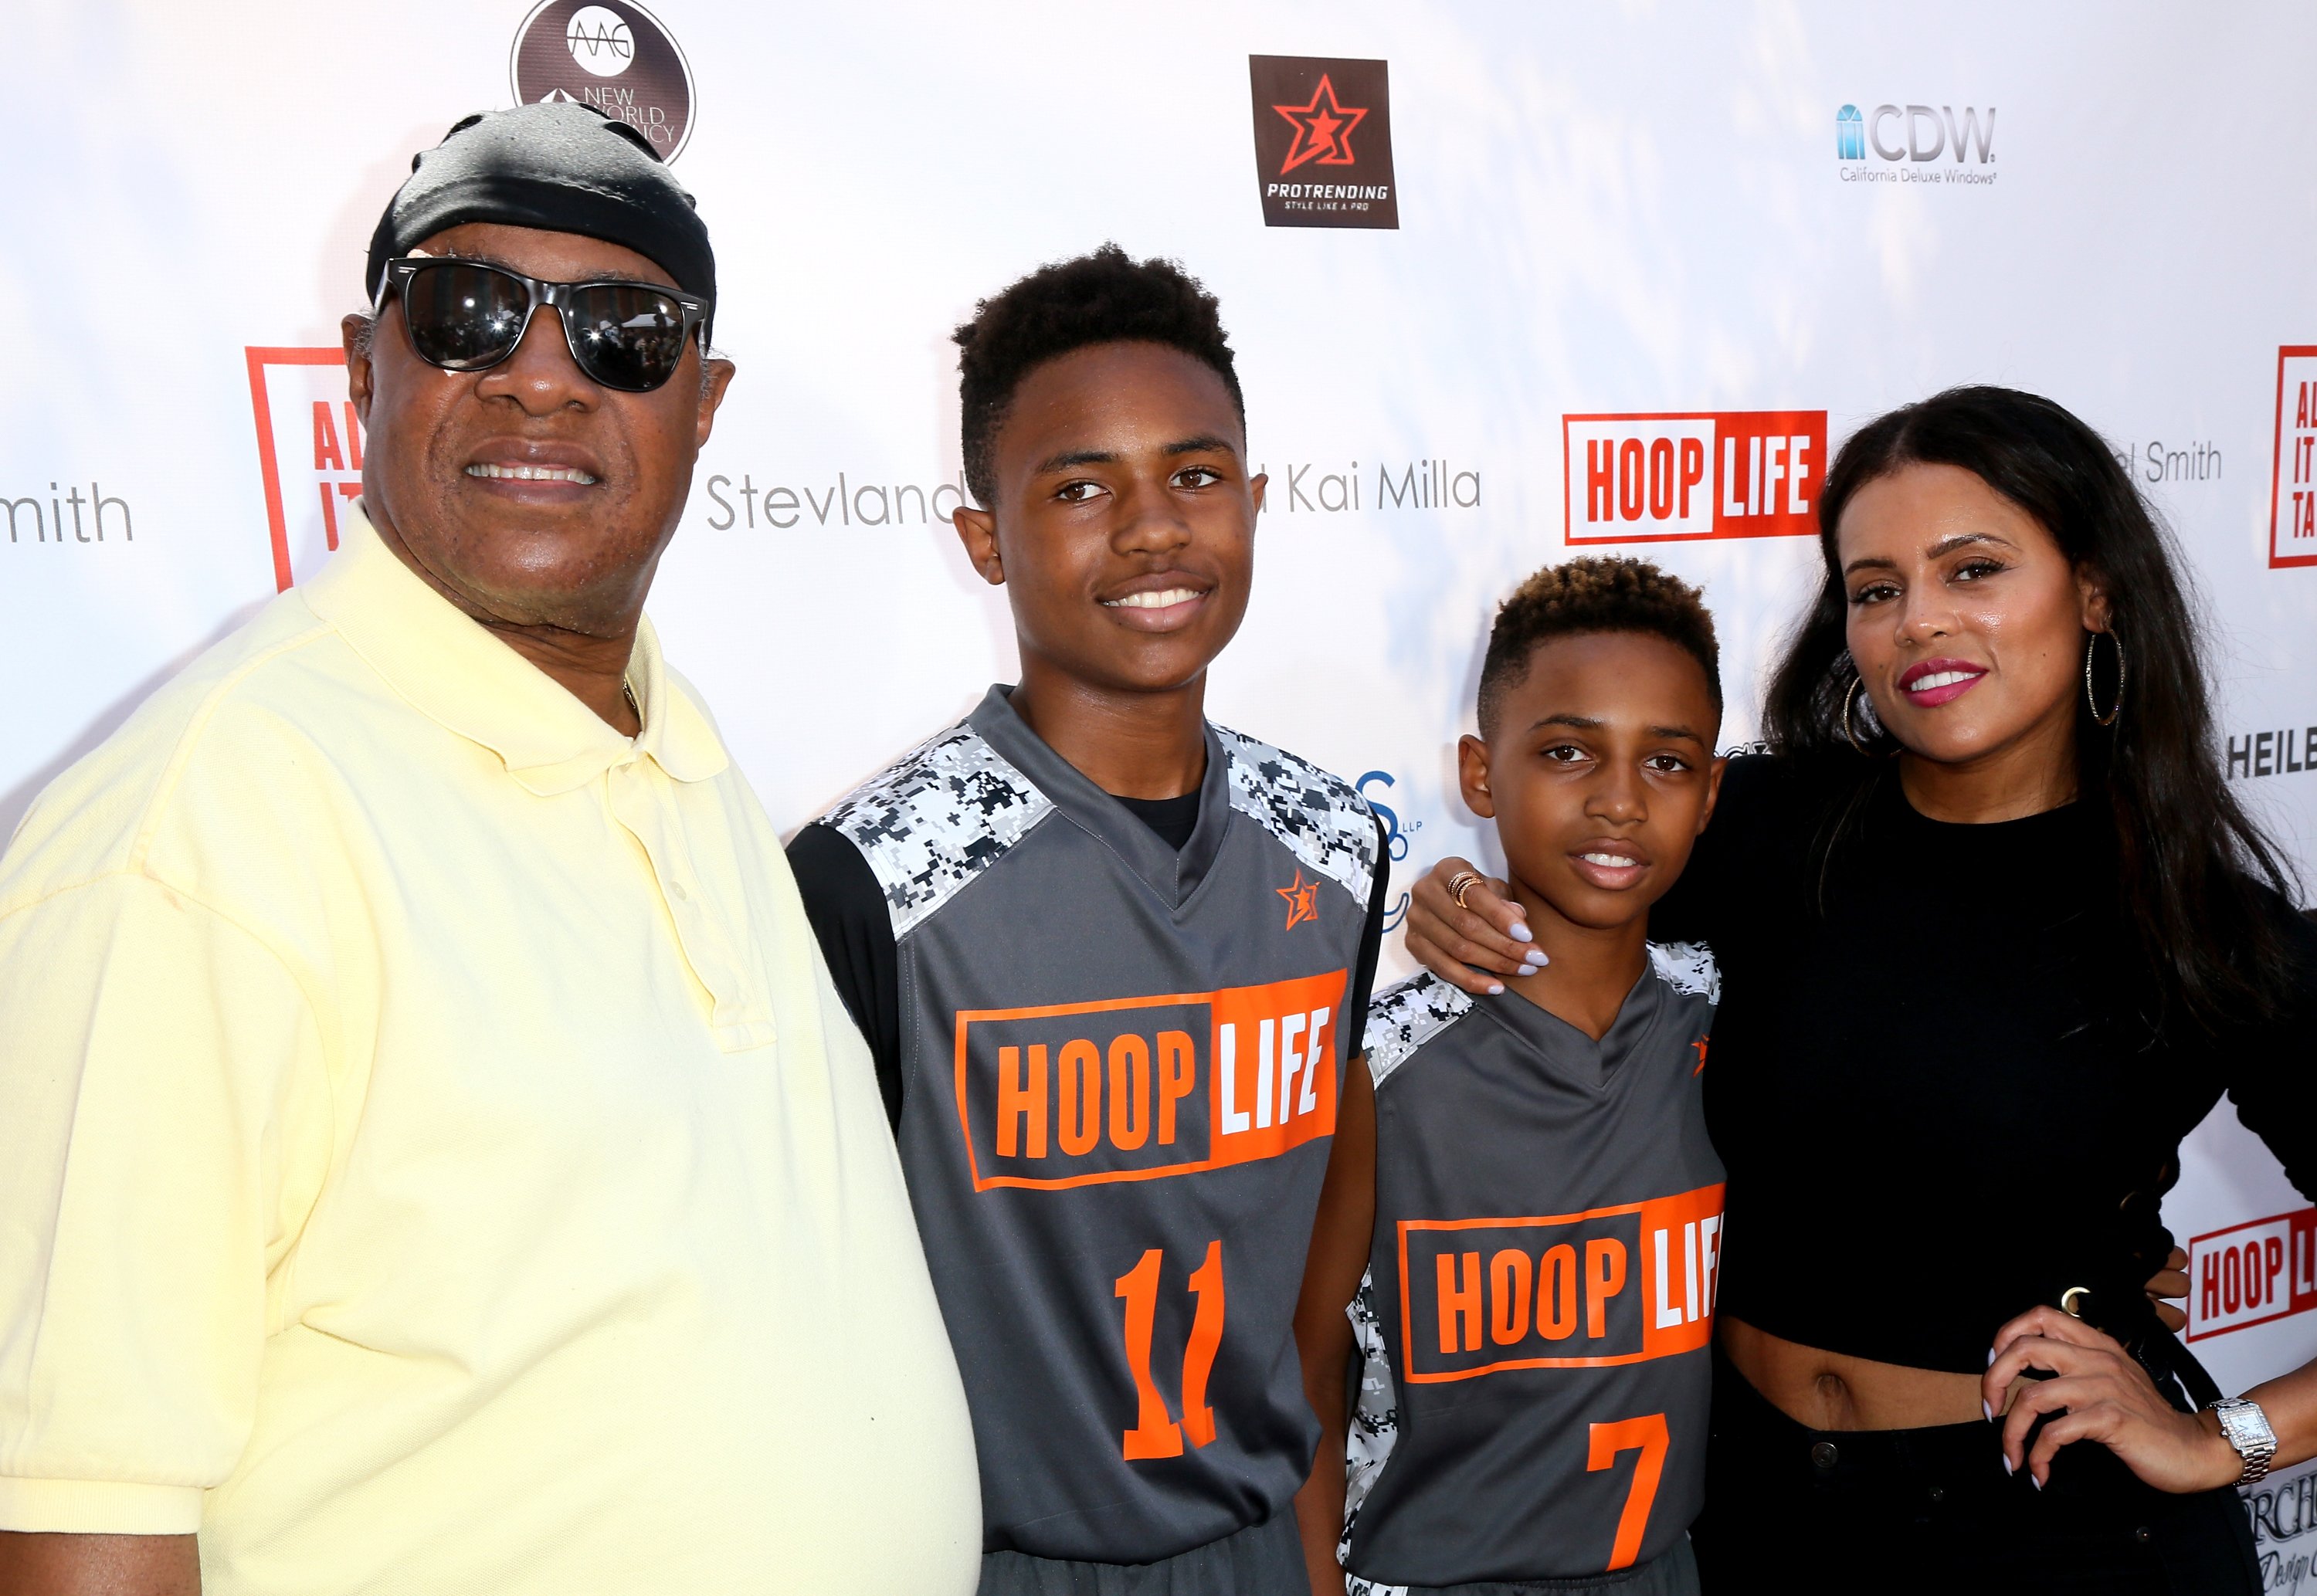 Stevie Wonder, Kailand Morris, Mandla Morris, and Kai Millard at the 4th Annual Kailand Obasi Hoop-Life Fundraiser at USC Galen Center in Los Angeles, California on August 28, 2016 | Source: Getty Images